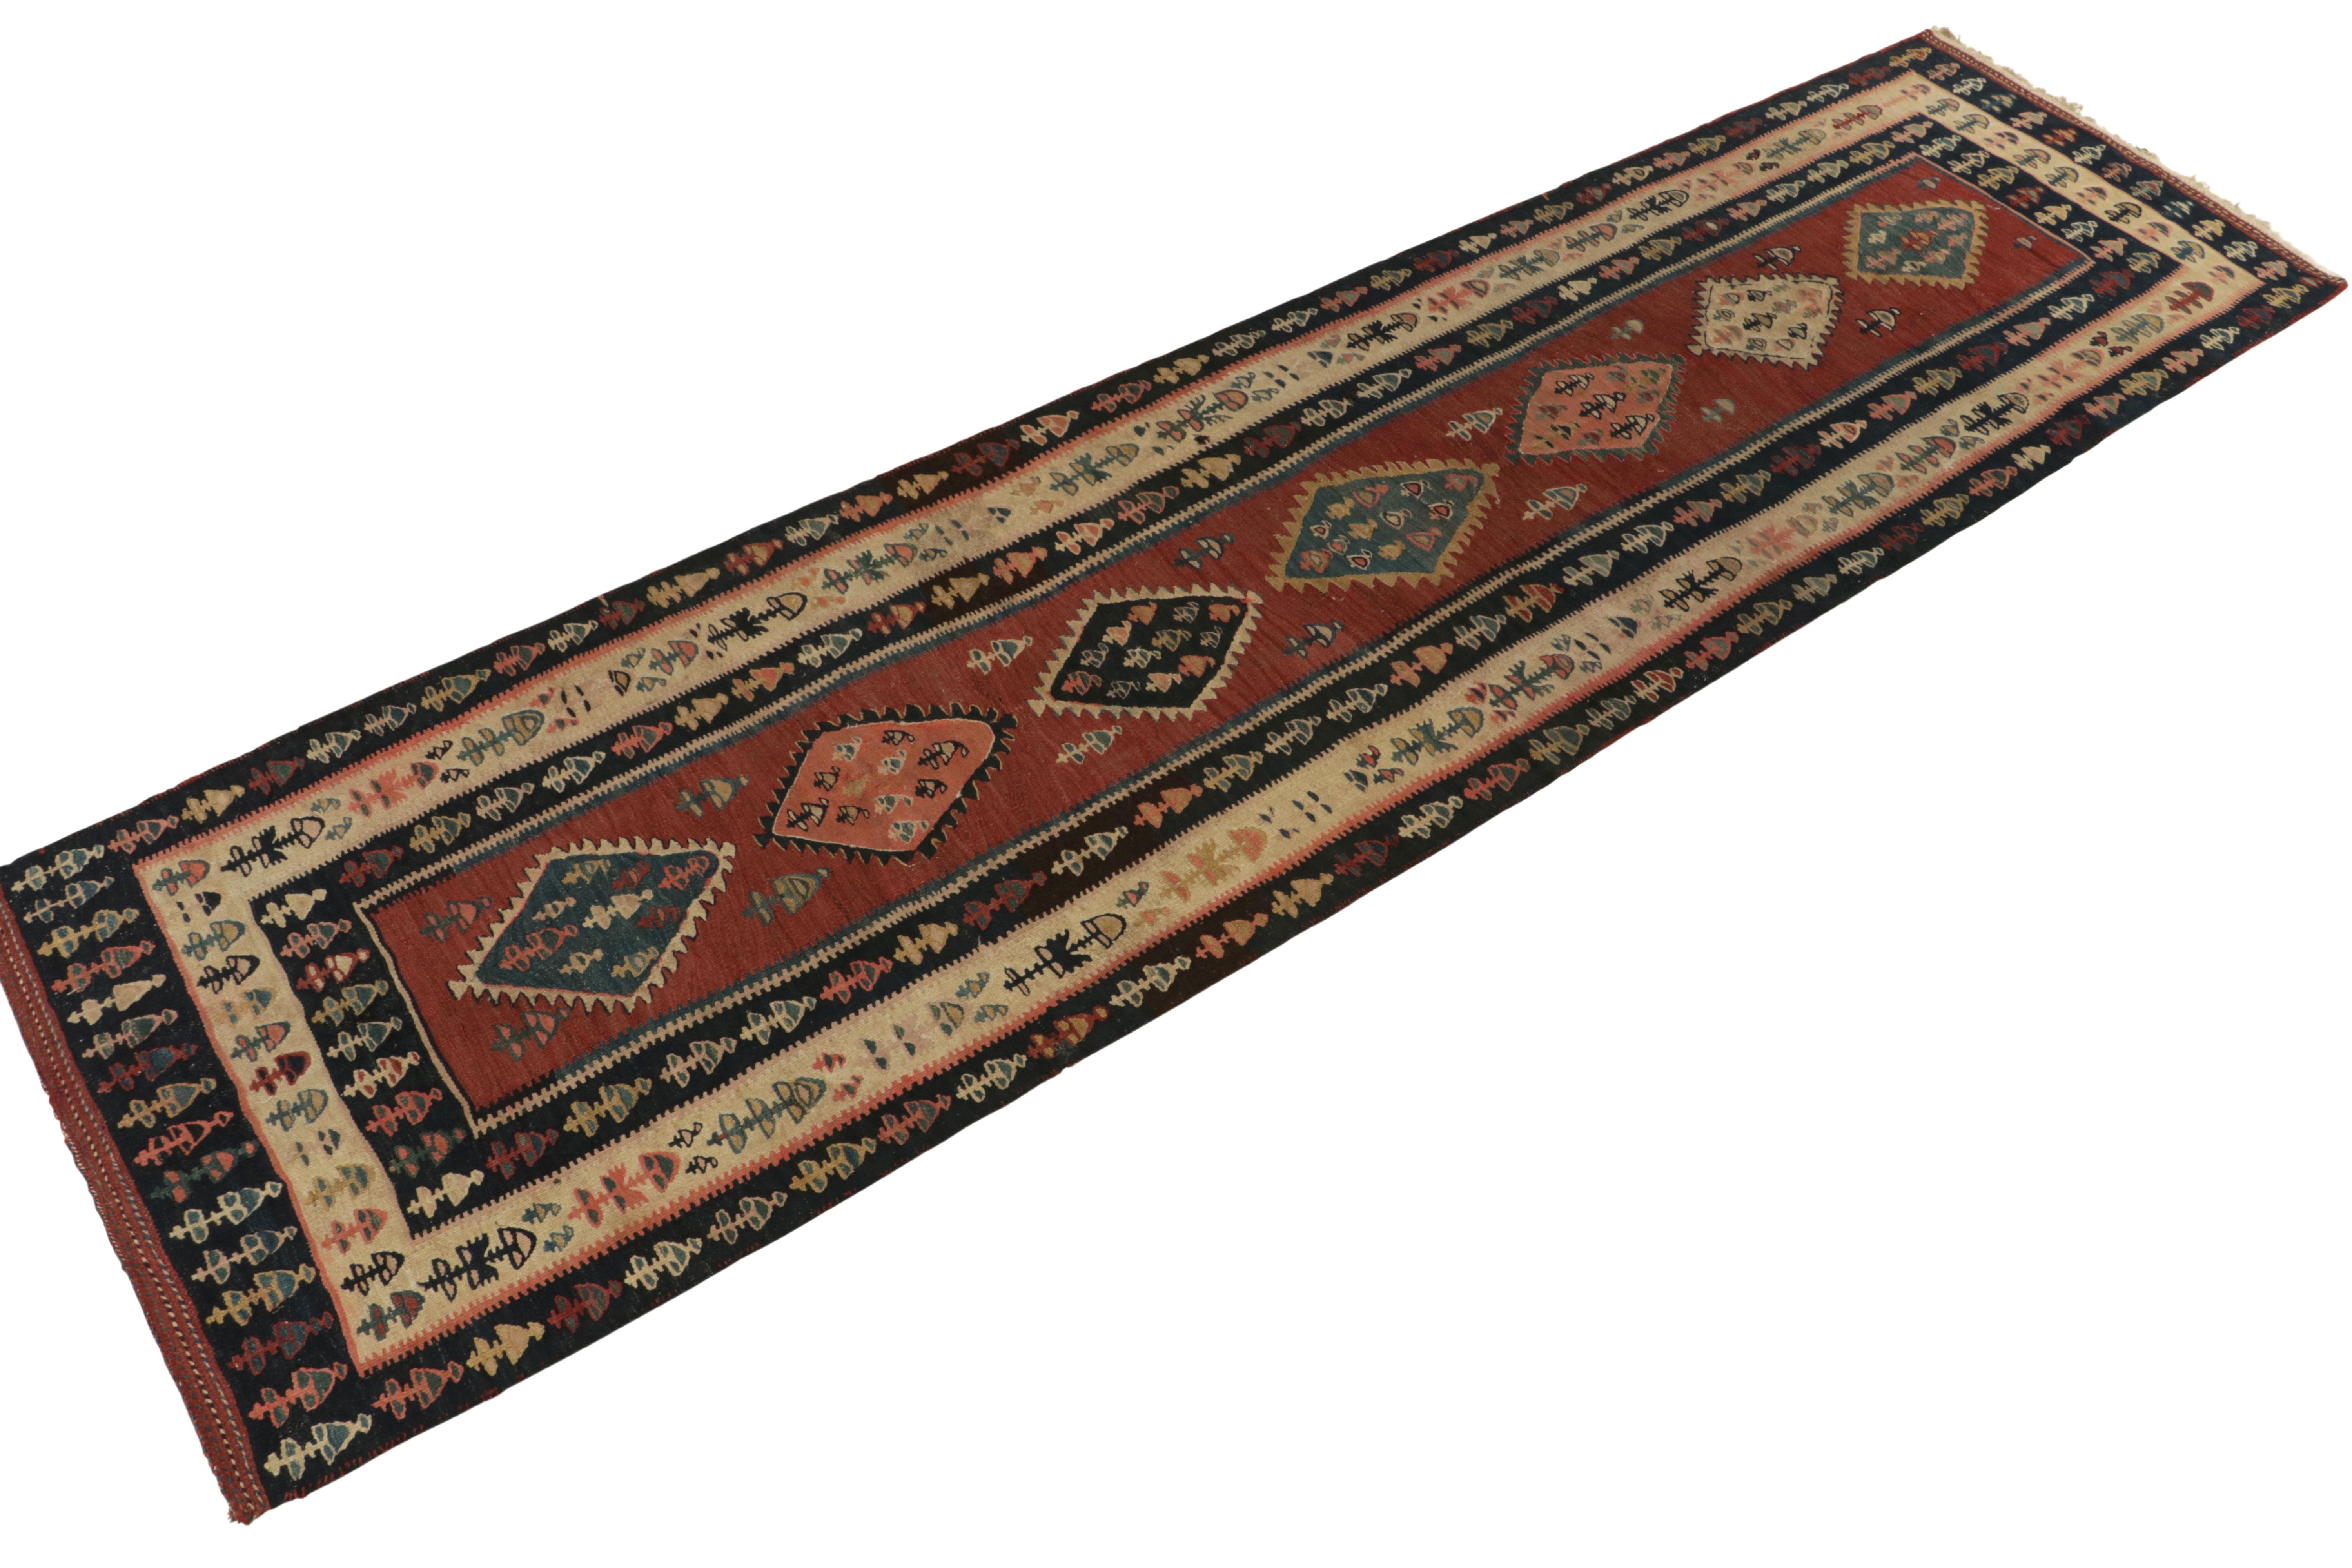 Handwoven in wool, a 4x12 Kilim rug from our vintage selections. Originating from Turkey circa 1950-1960, the mid-century aesthetics seep through motifs & patterns relishing a shabby chic vibe with beige-brown, black and whimsical hues against a